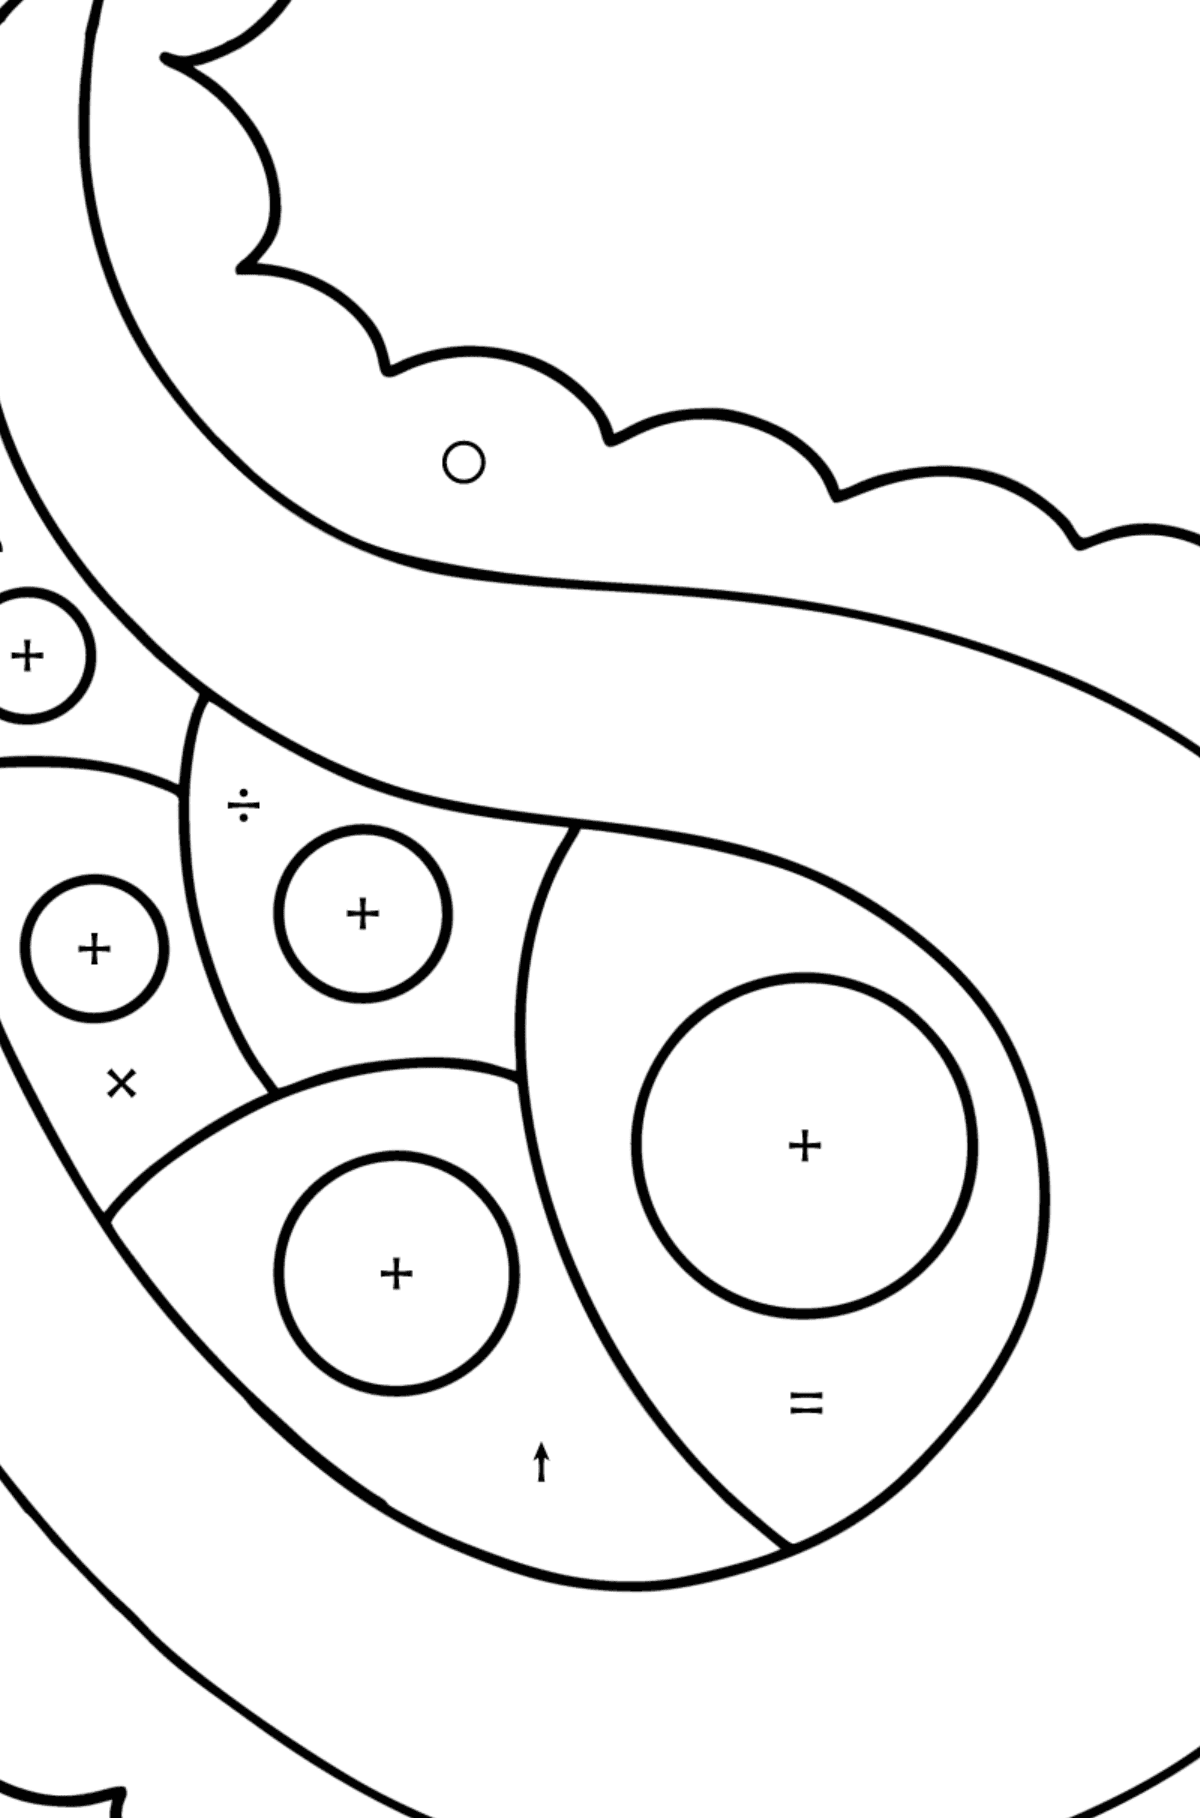 Kids Paisley coloring page - Coloring by Symbols and Geometric Shapes for Kids